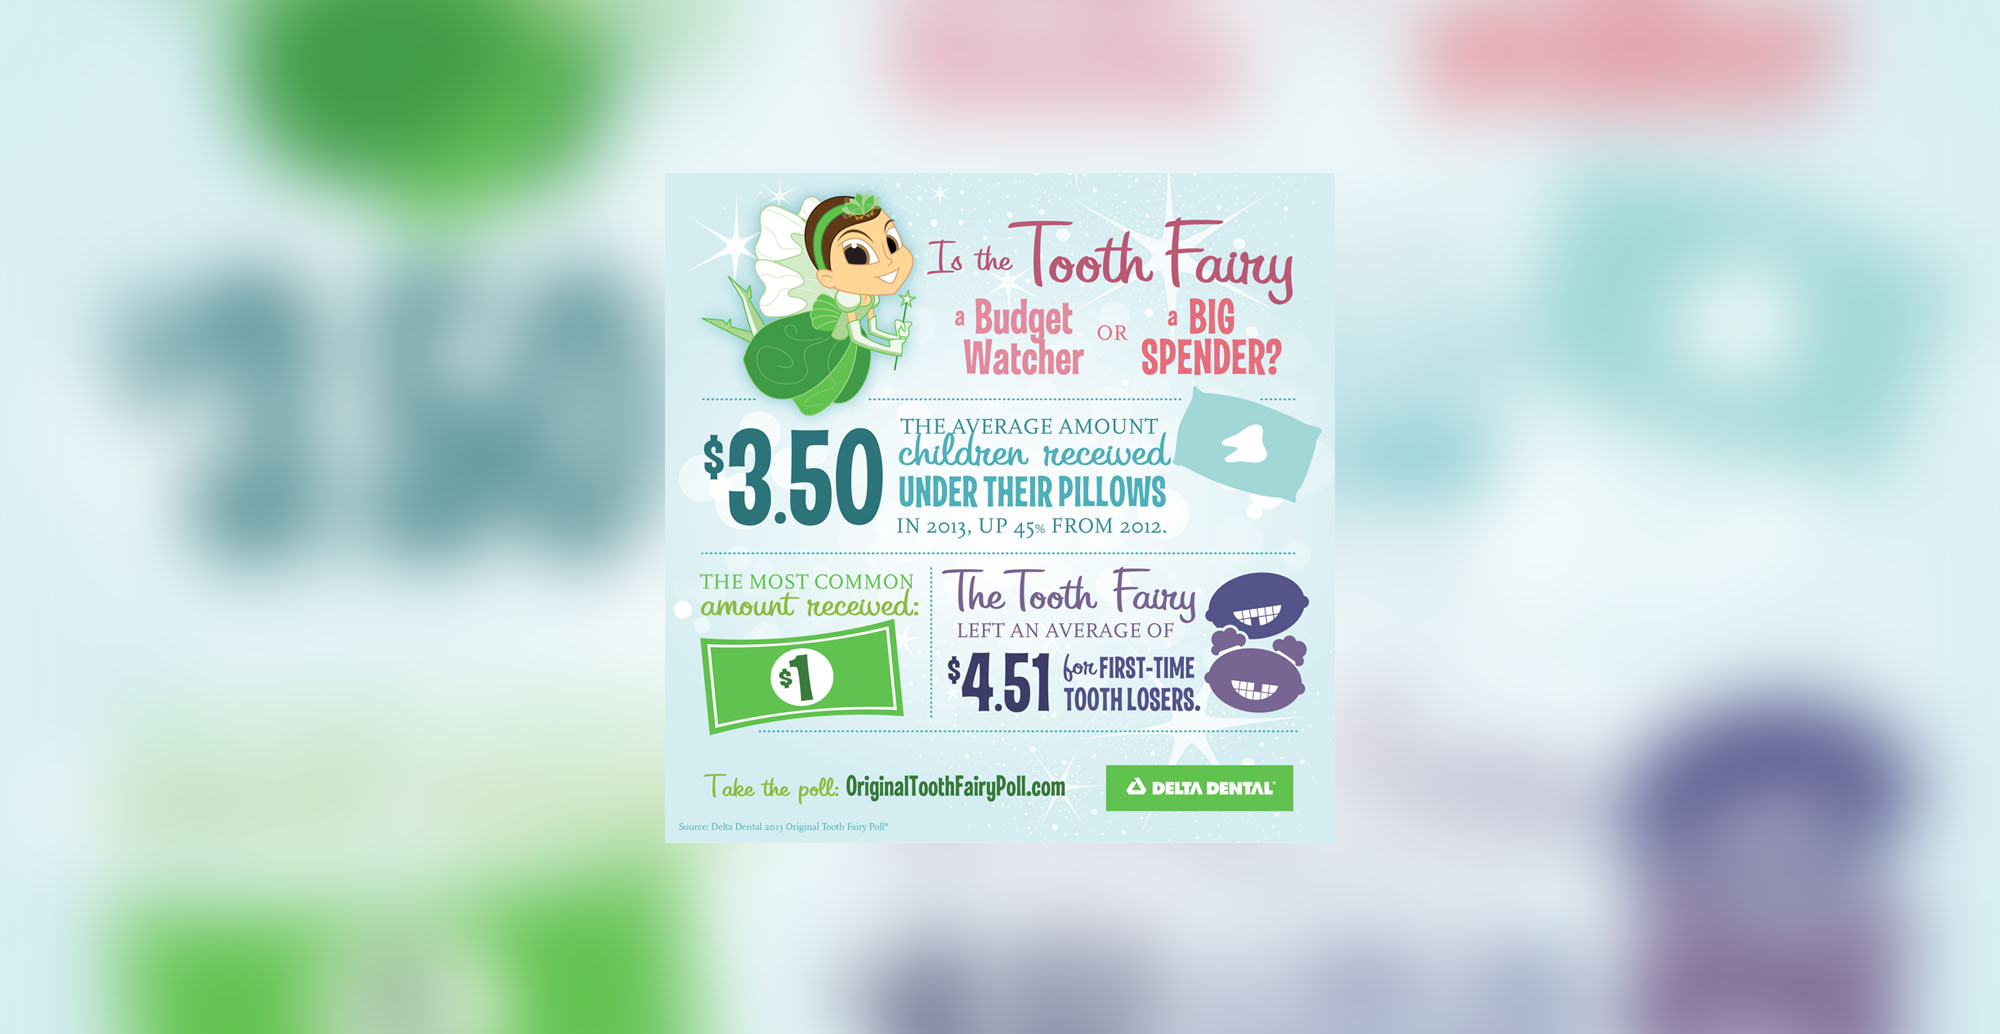 PHOTO: The Tooth Fairy gave an average of $3.50 per tooth in 2013, a 45 percent increase from 2012. 